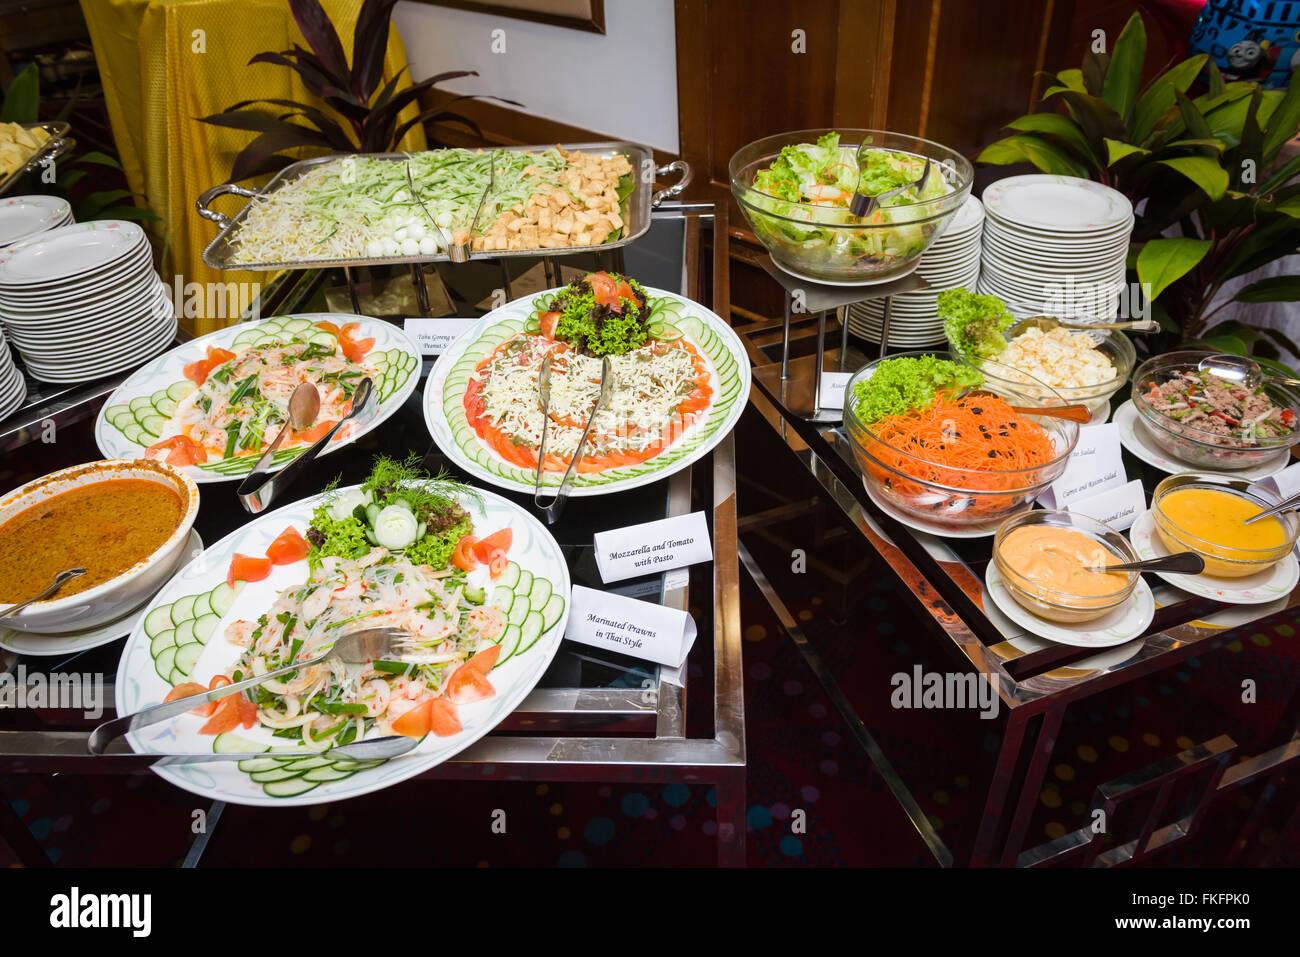 Wide assortment of vegetarian and non-vegetarian salad dishes. Diet and healthy lifestyle concepts. Stock Photo